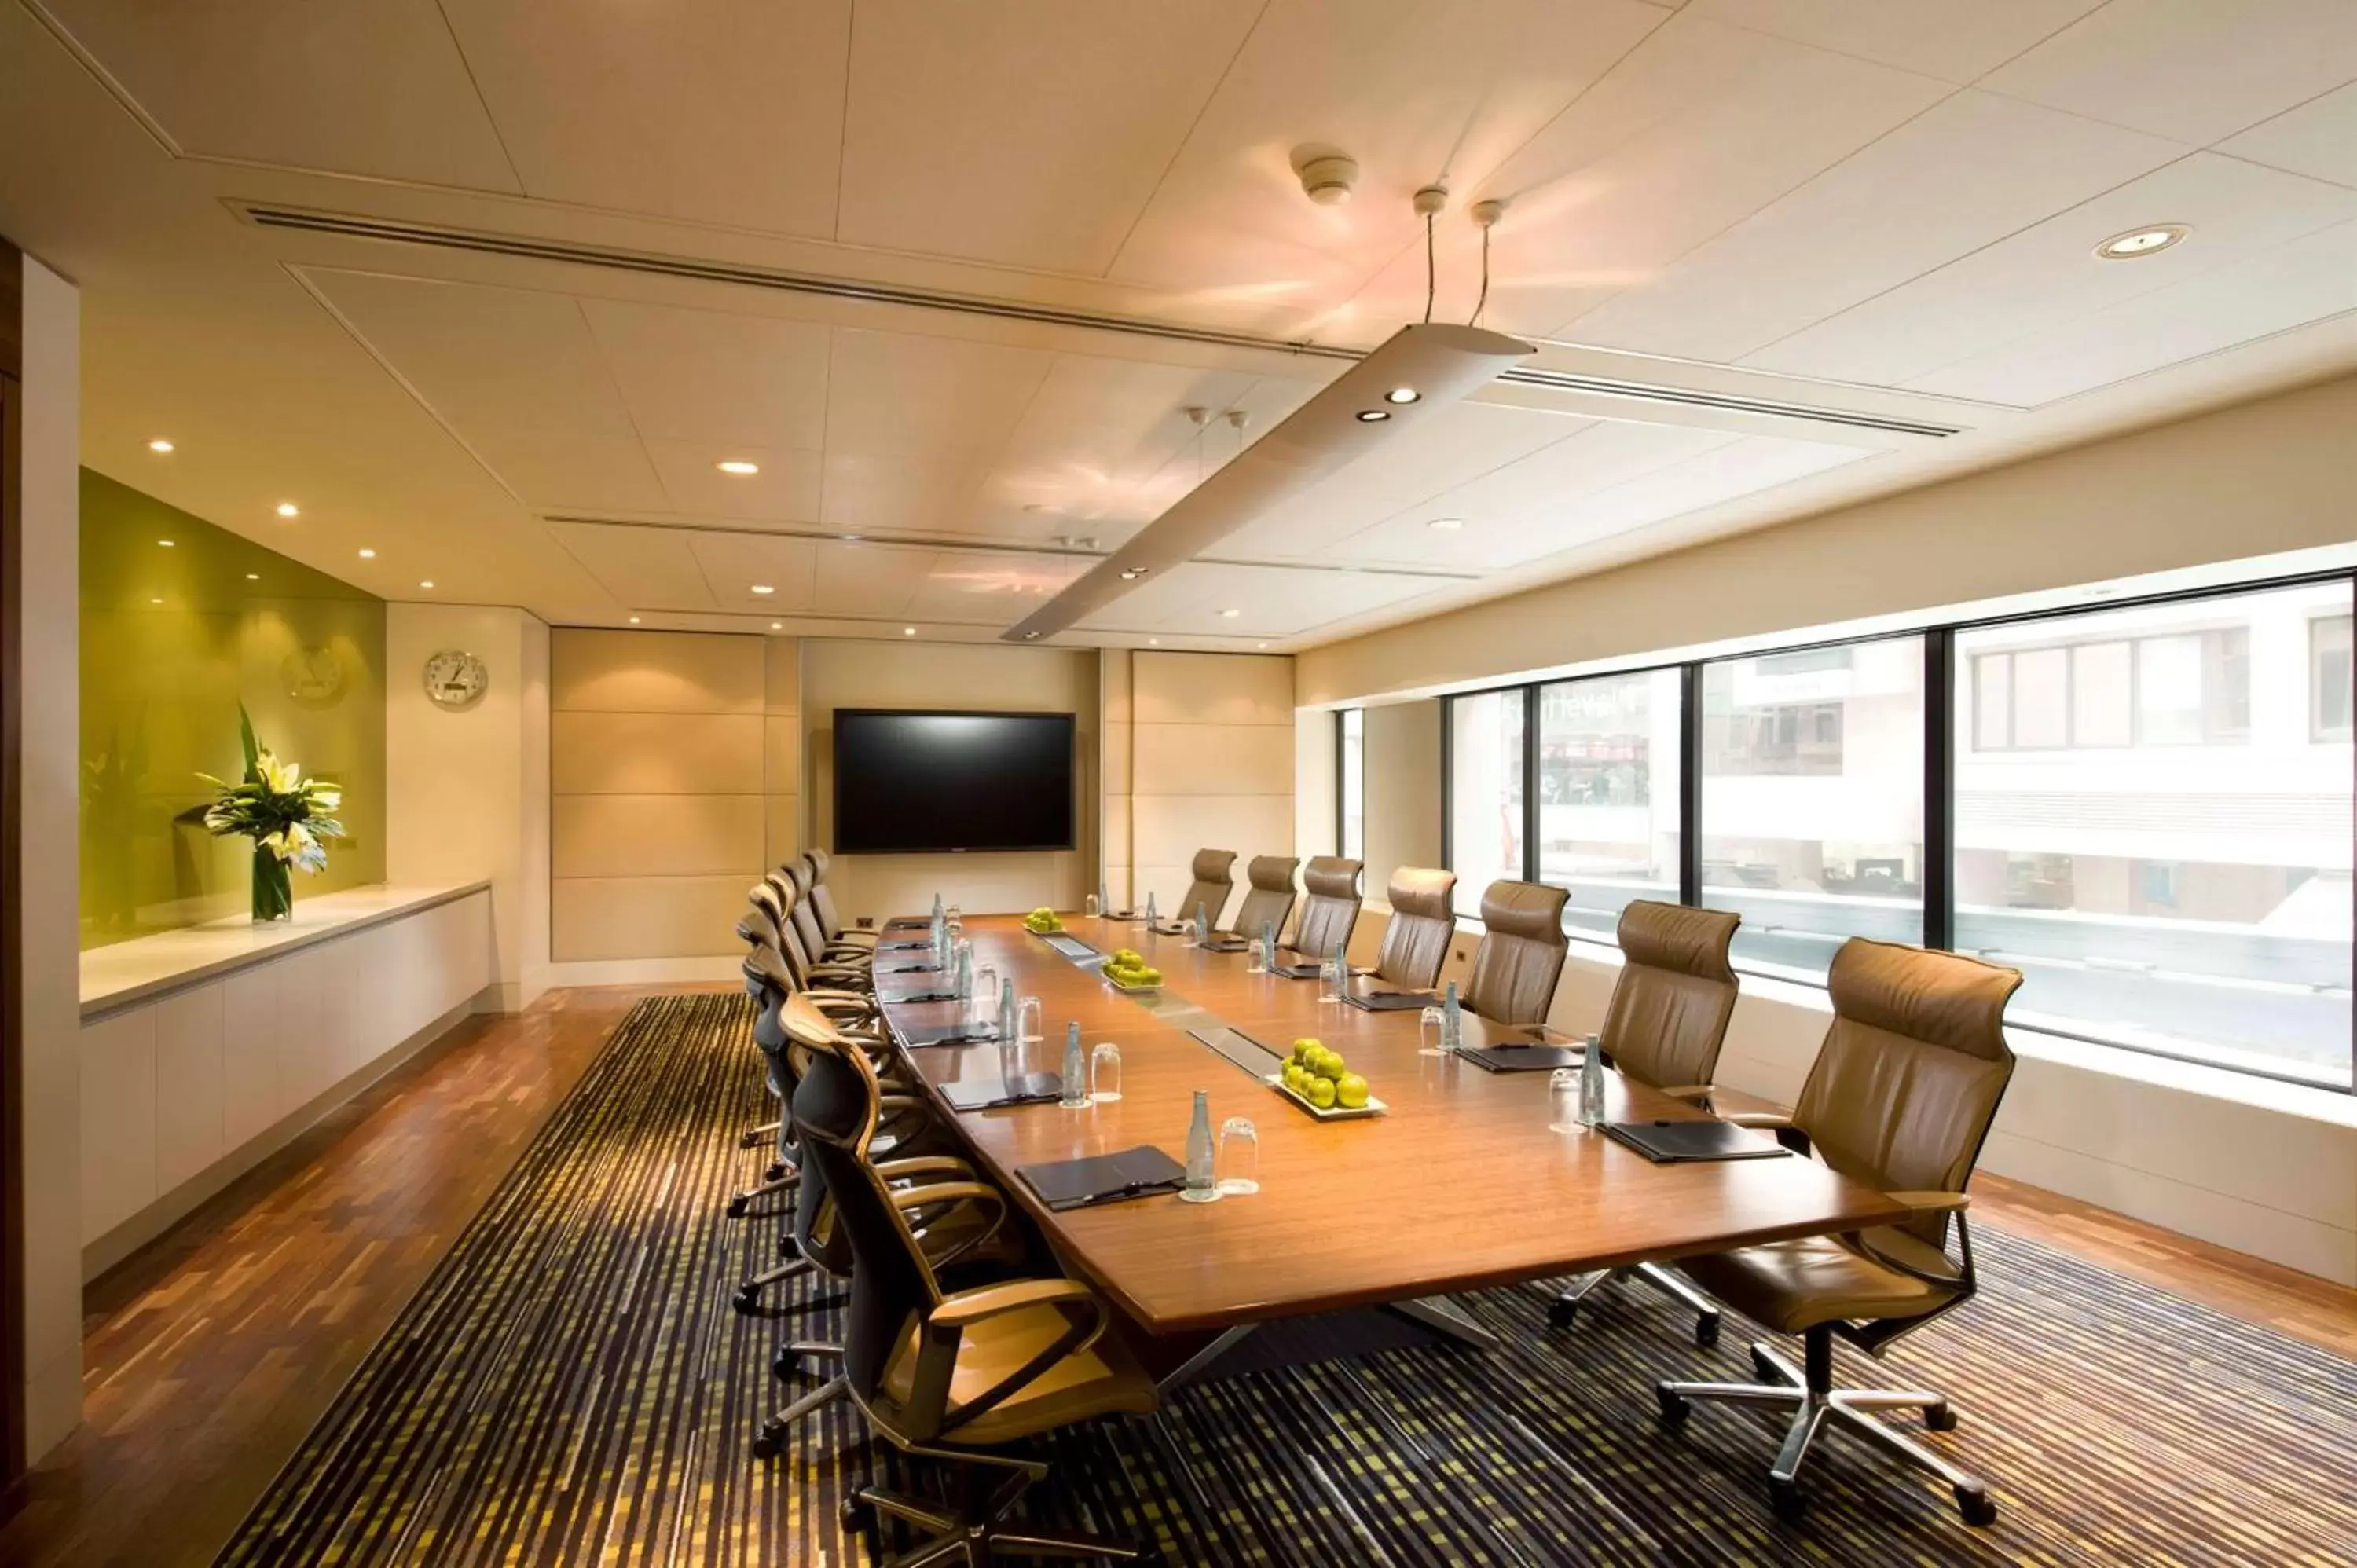 Meeting/conference room in Hilton Sydney